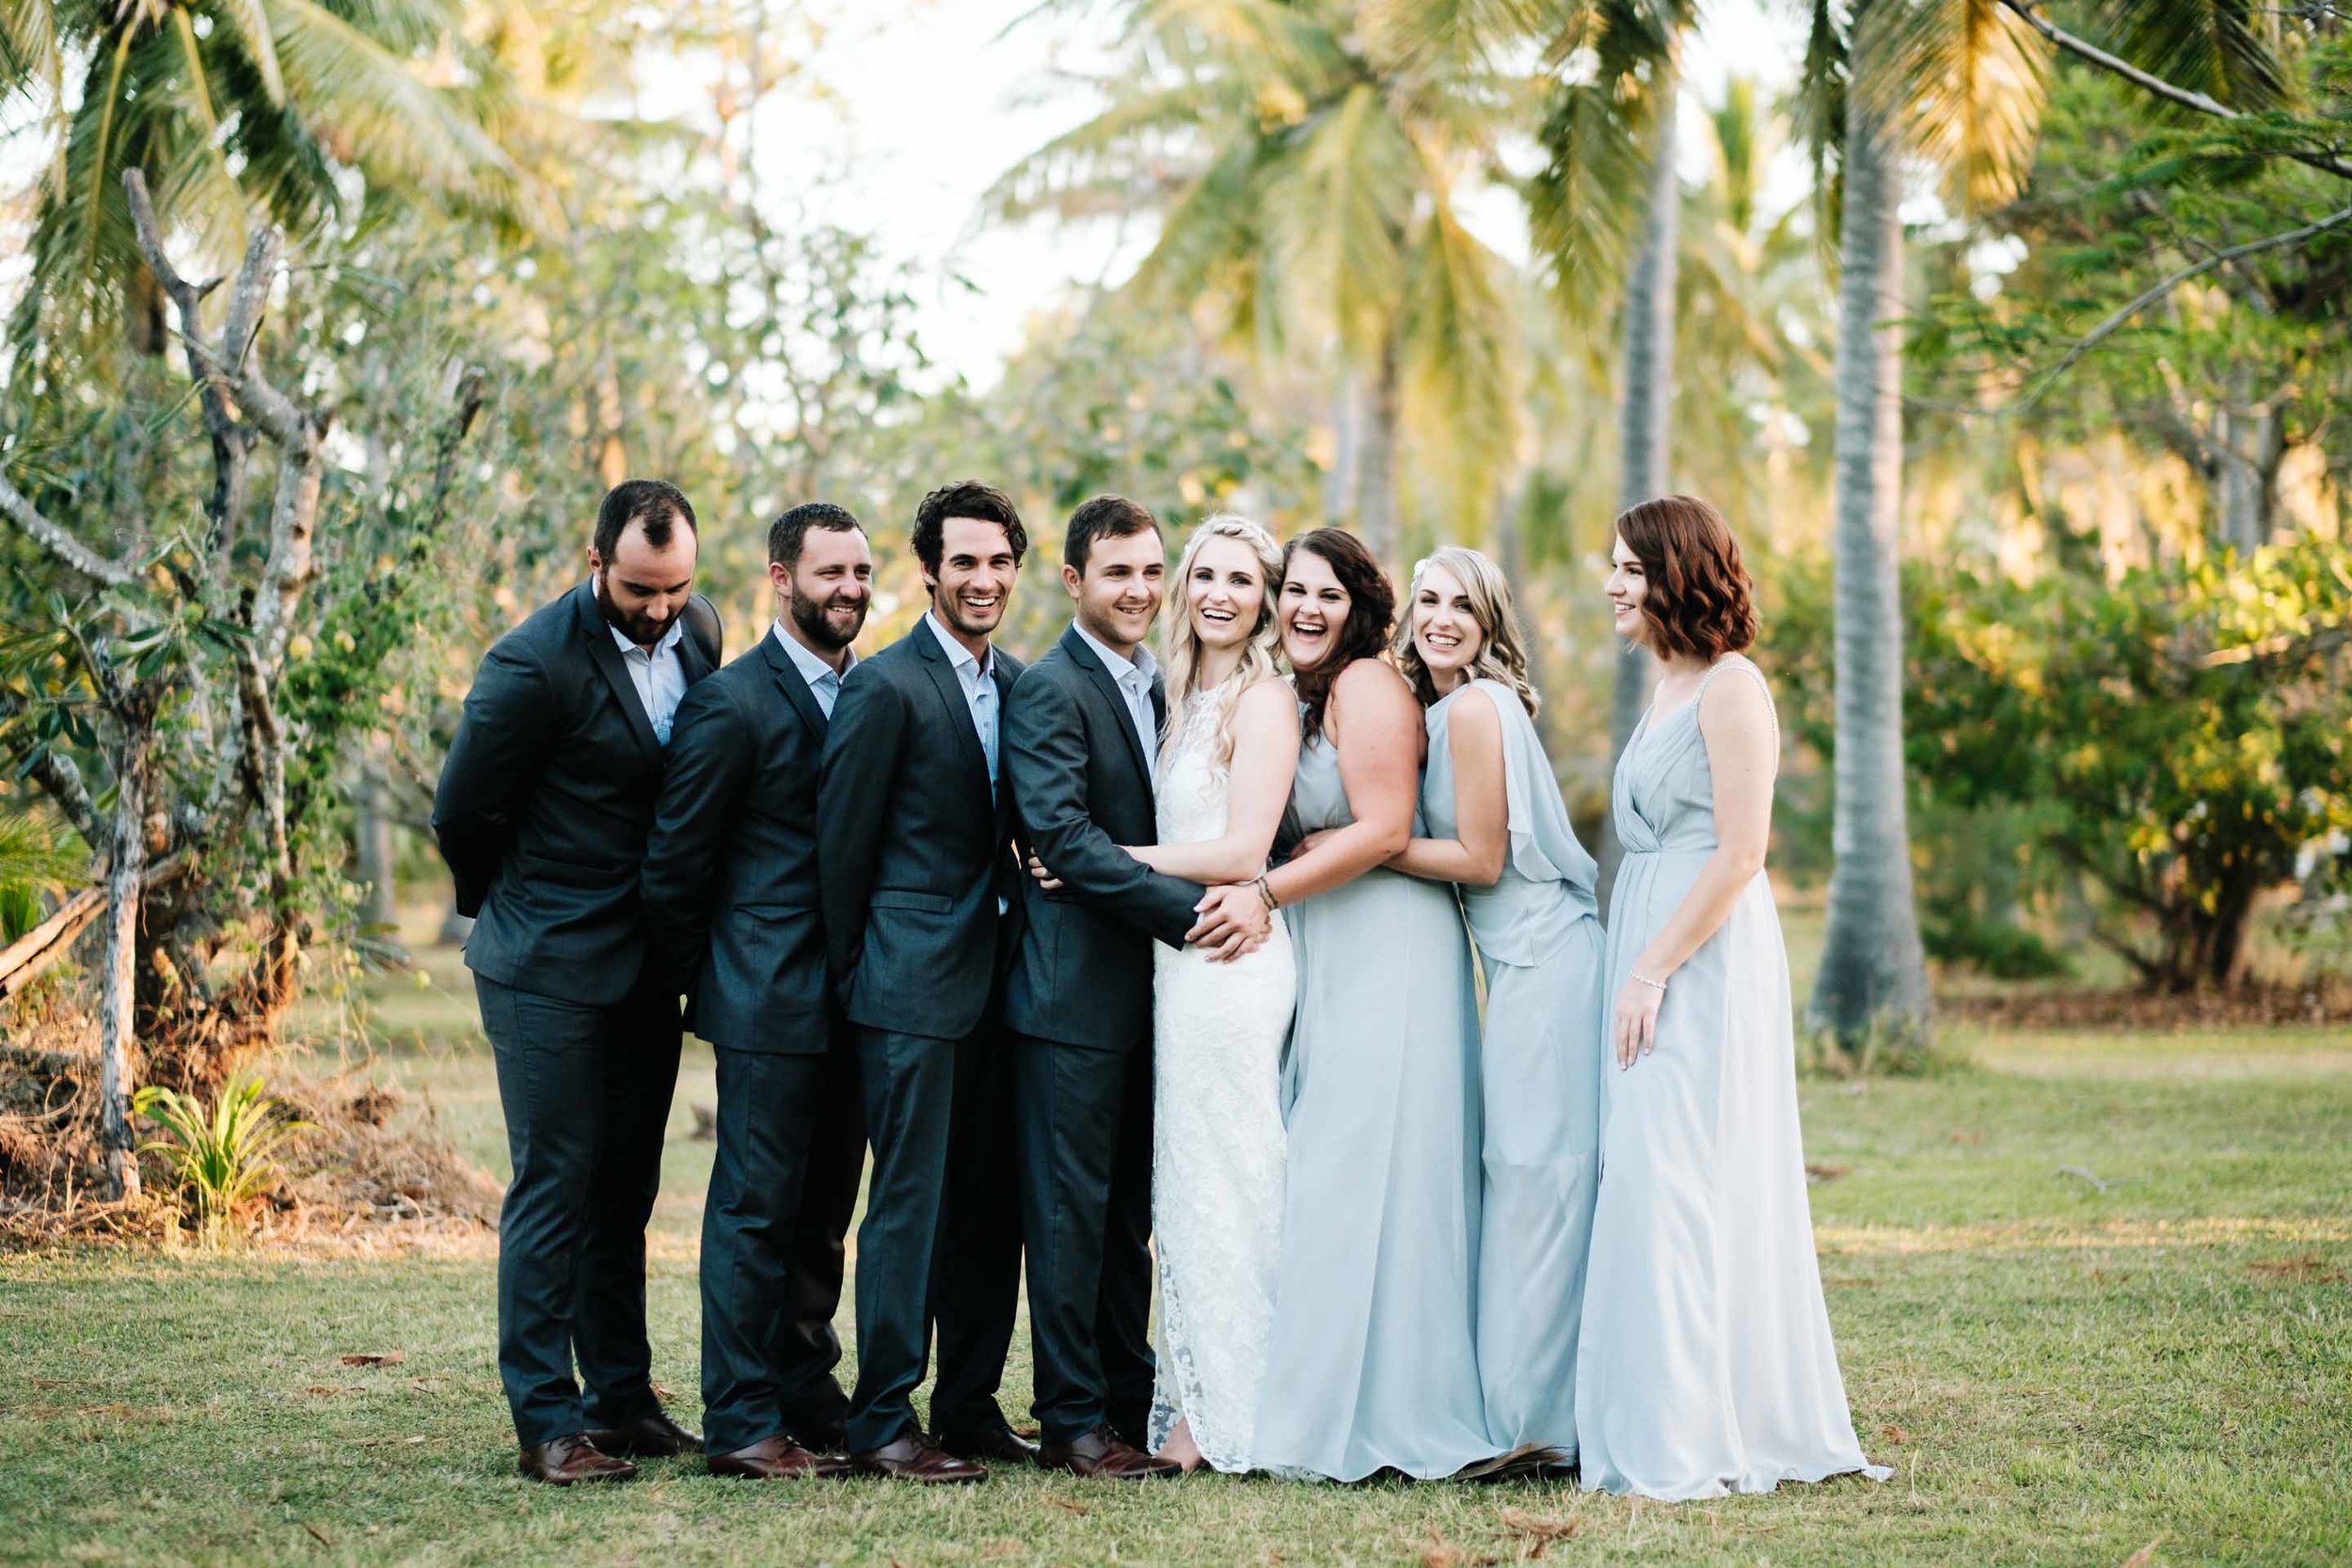 the bridal party together in the grounds behind Lomani Island Resort sharing a group hug